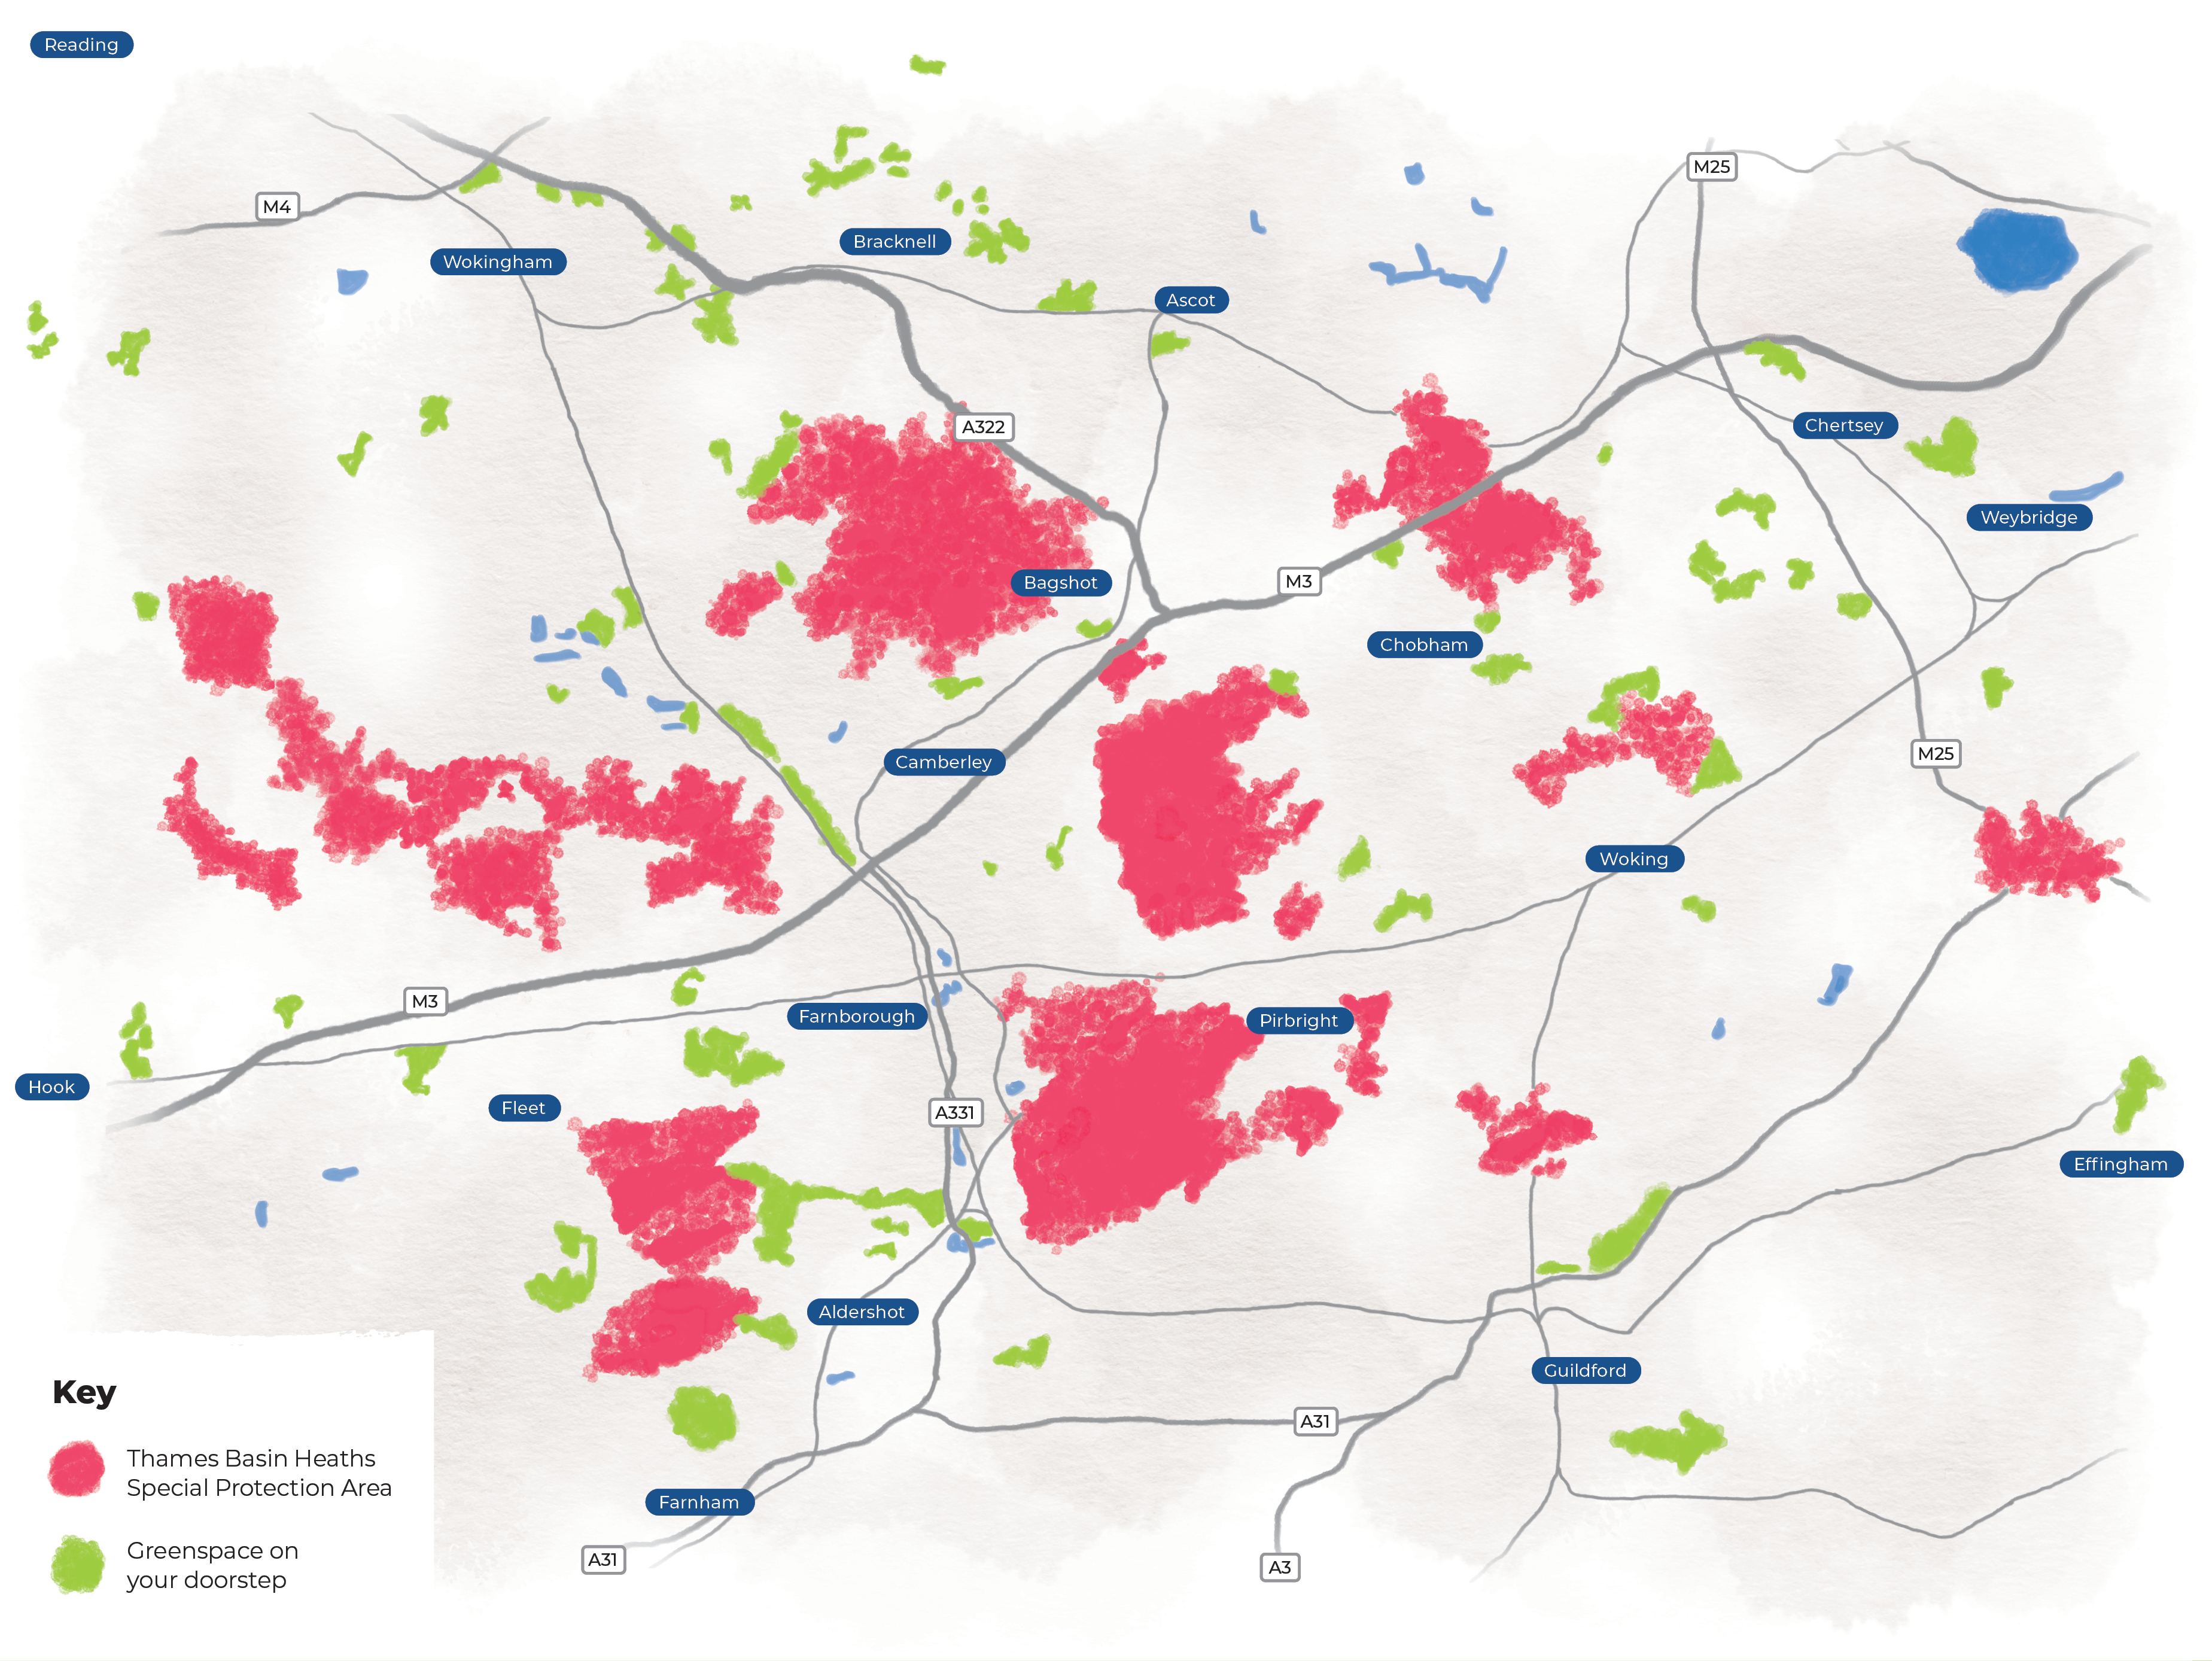 Map showing the Thames Basin Heaths Special Protection Area and 'Greenspace on your doorstep'